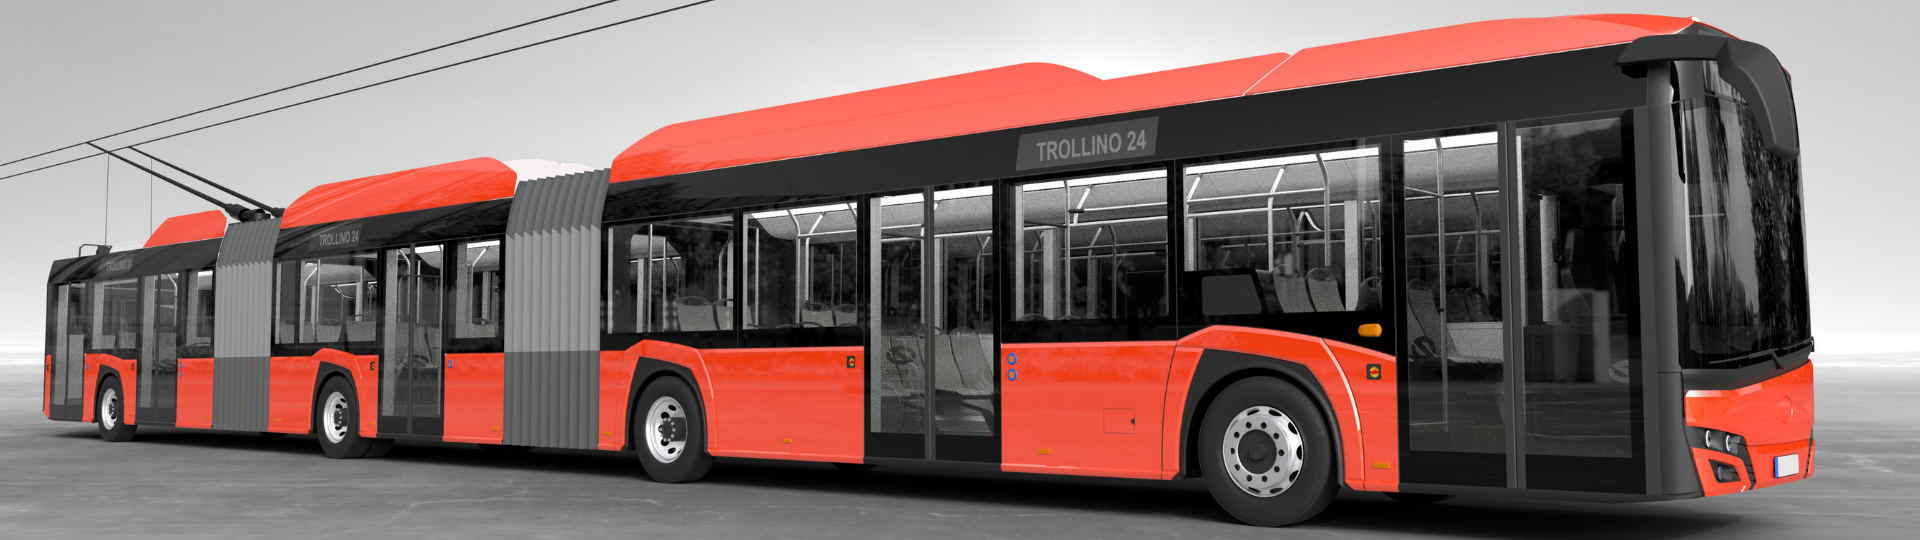 Another contract for Solaris Trollino 24 - 16 vehicles will go to the Slovak capital